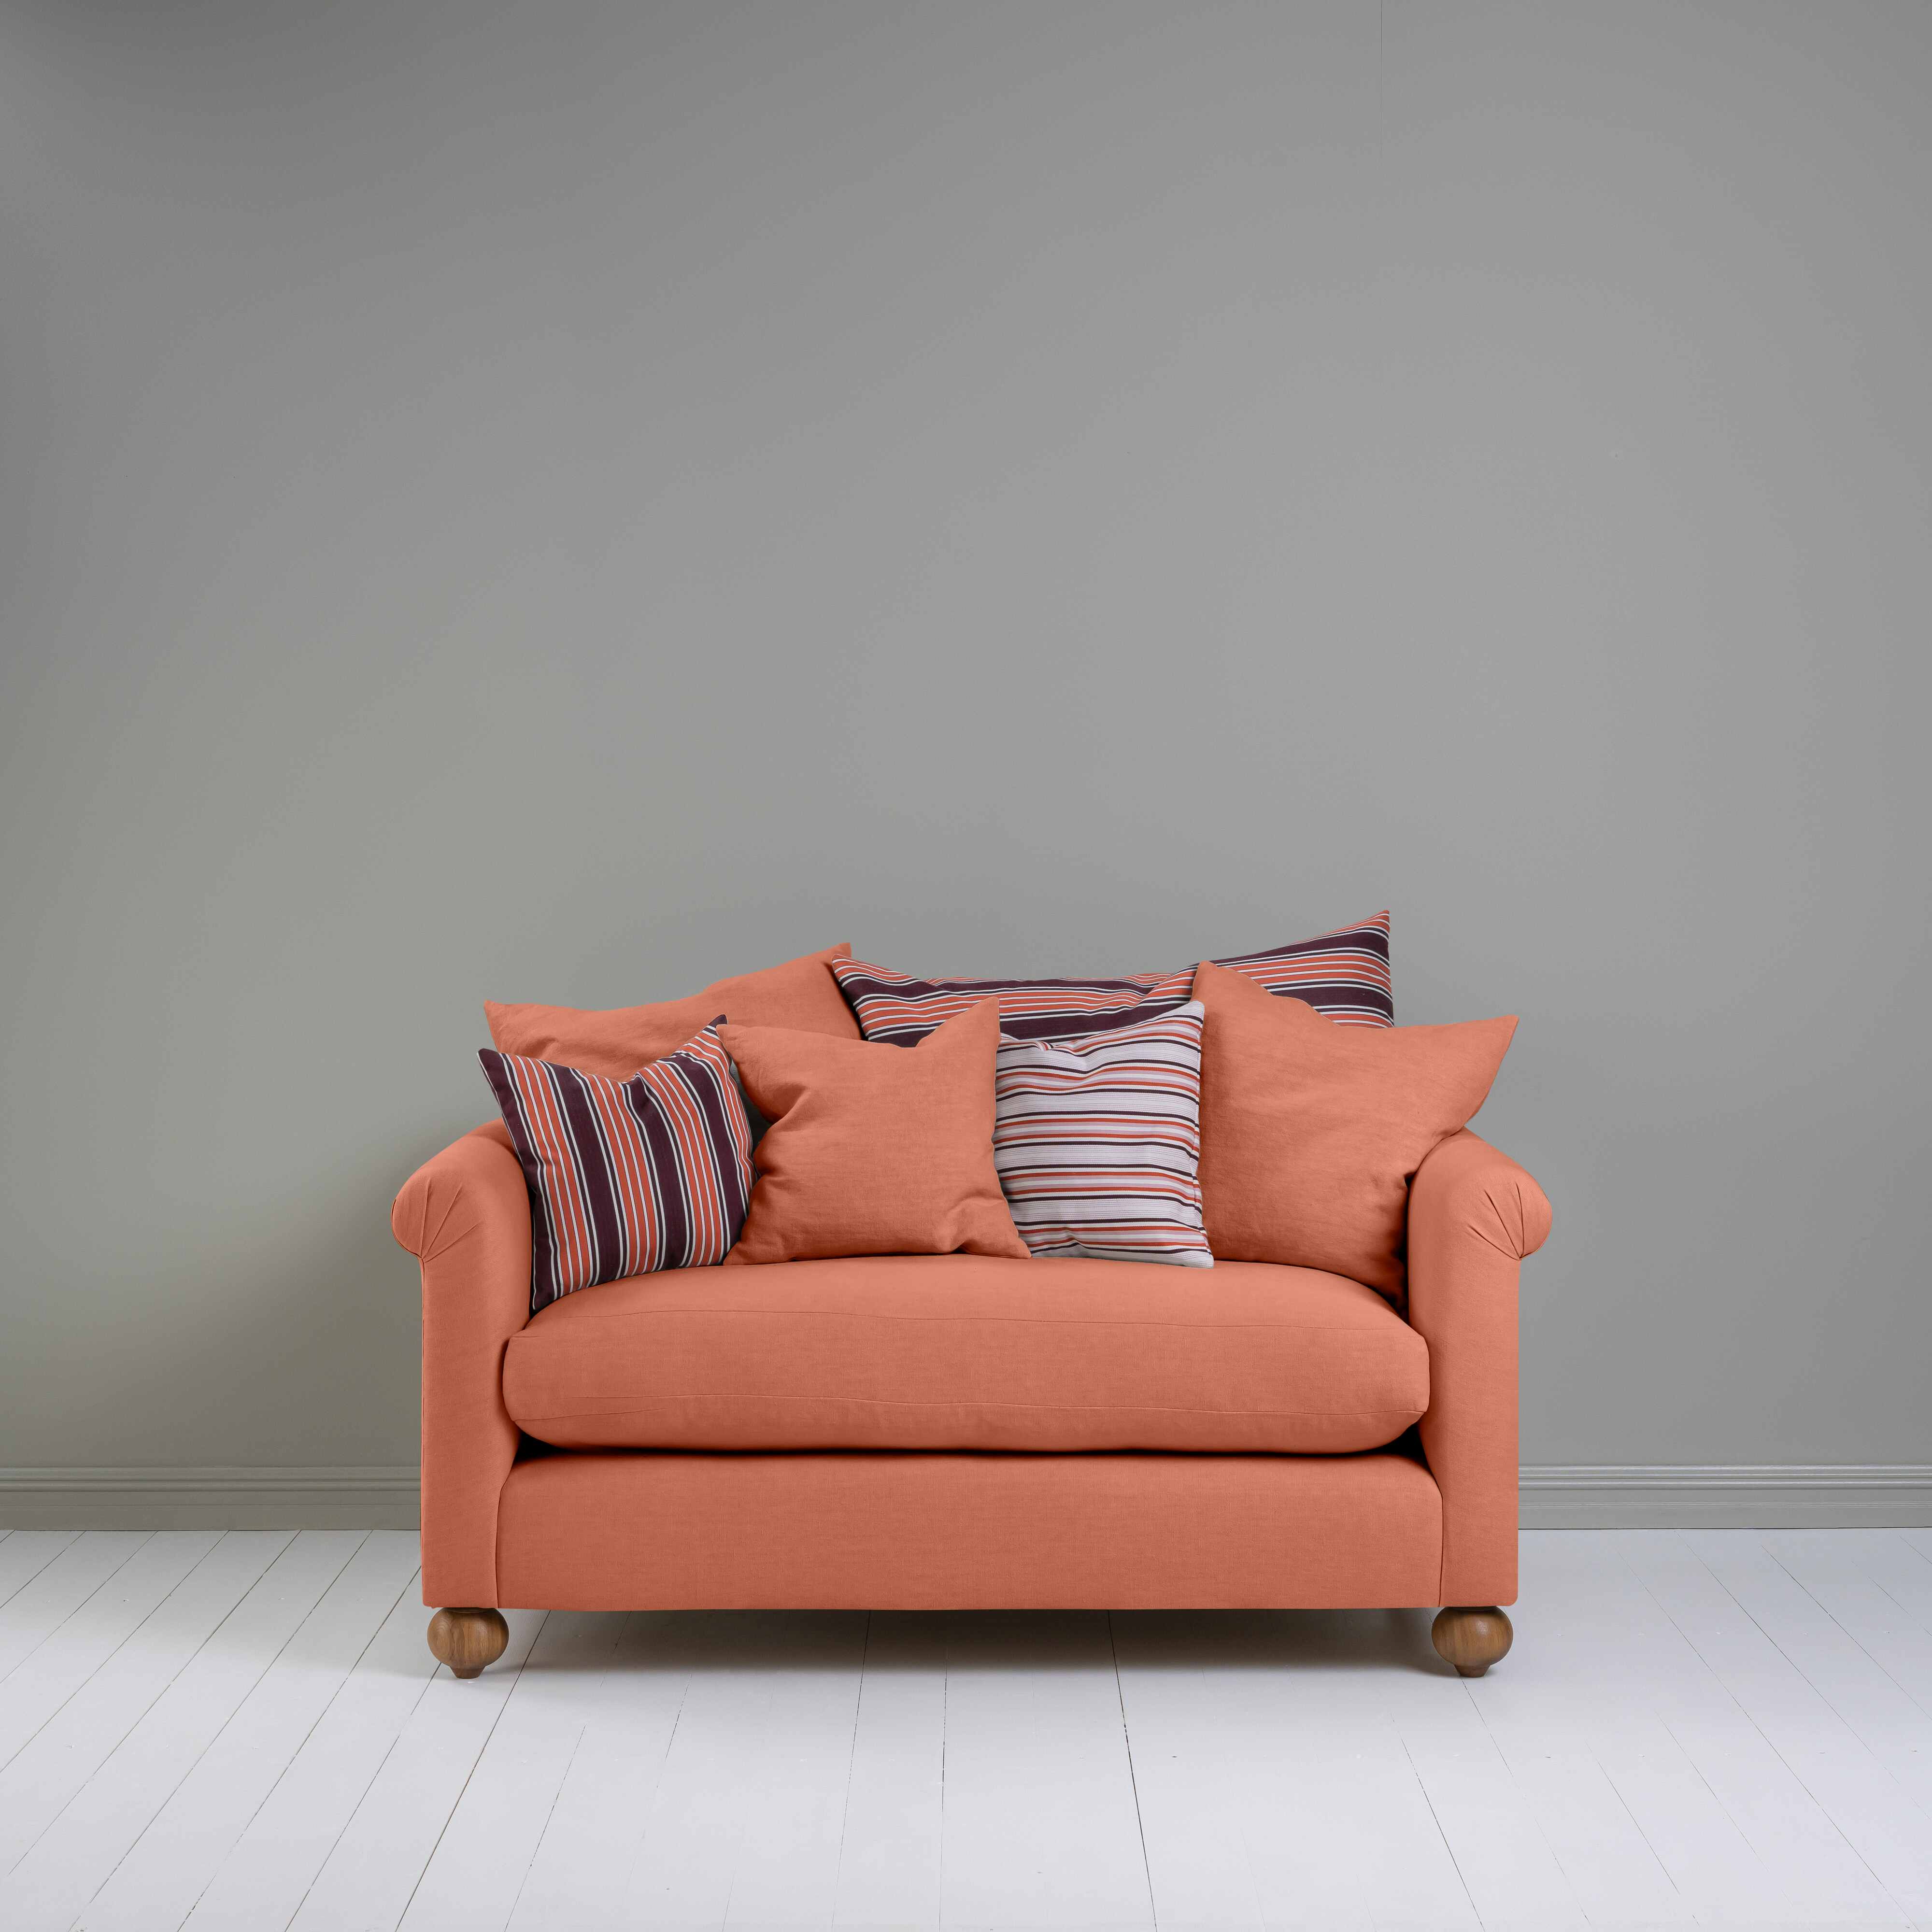  Dolittle 2 Seater Sofa in Laidback Linen Cayenne 